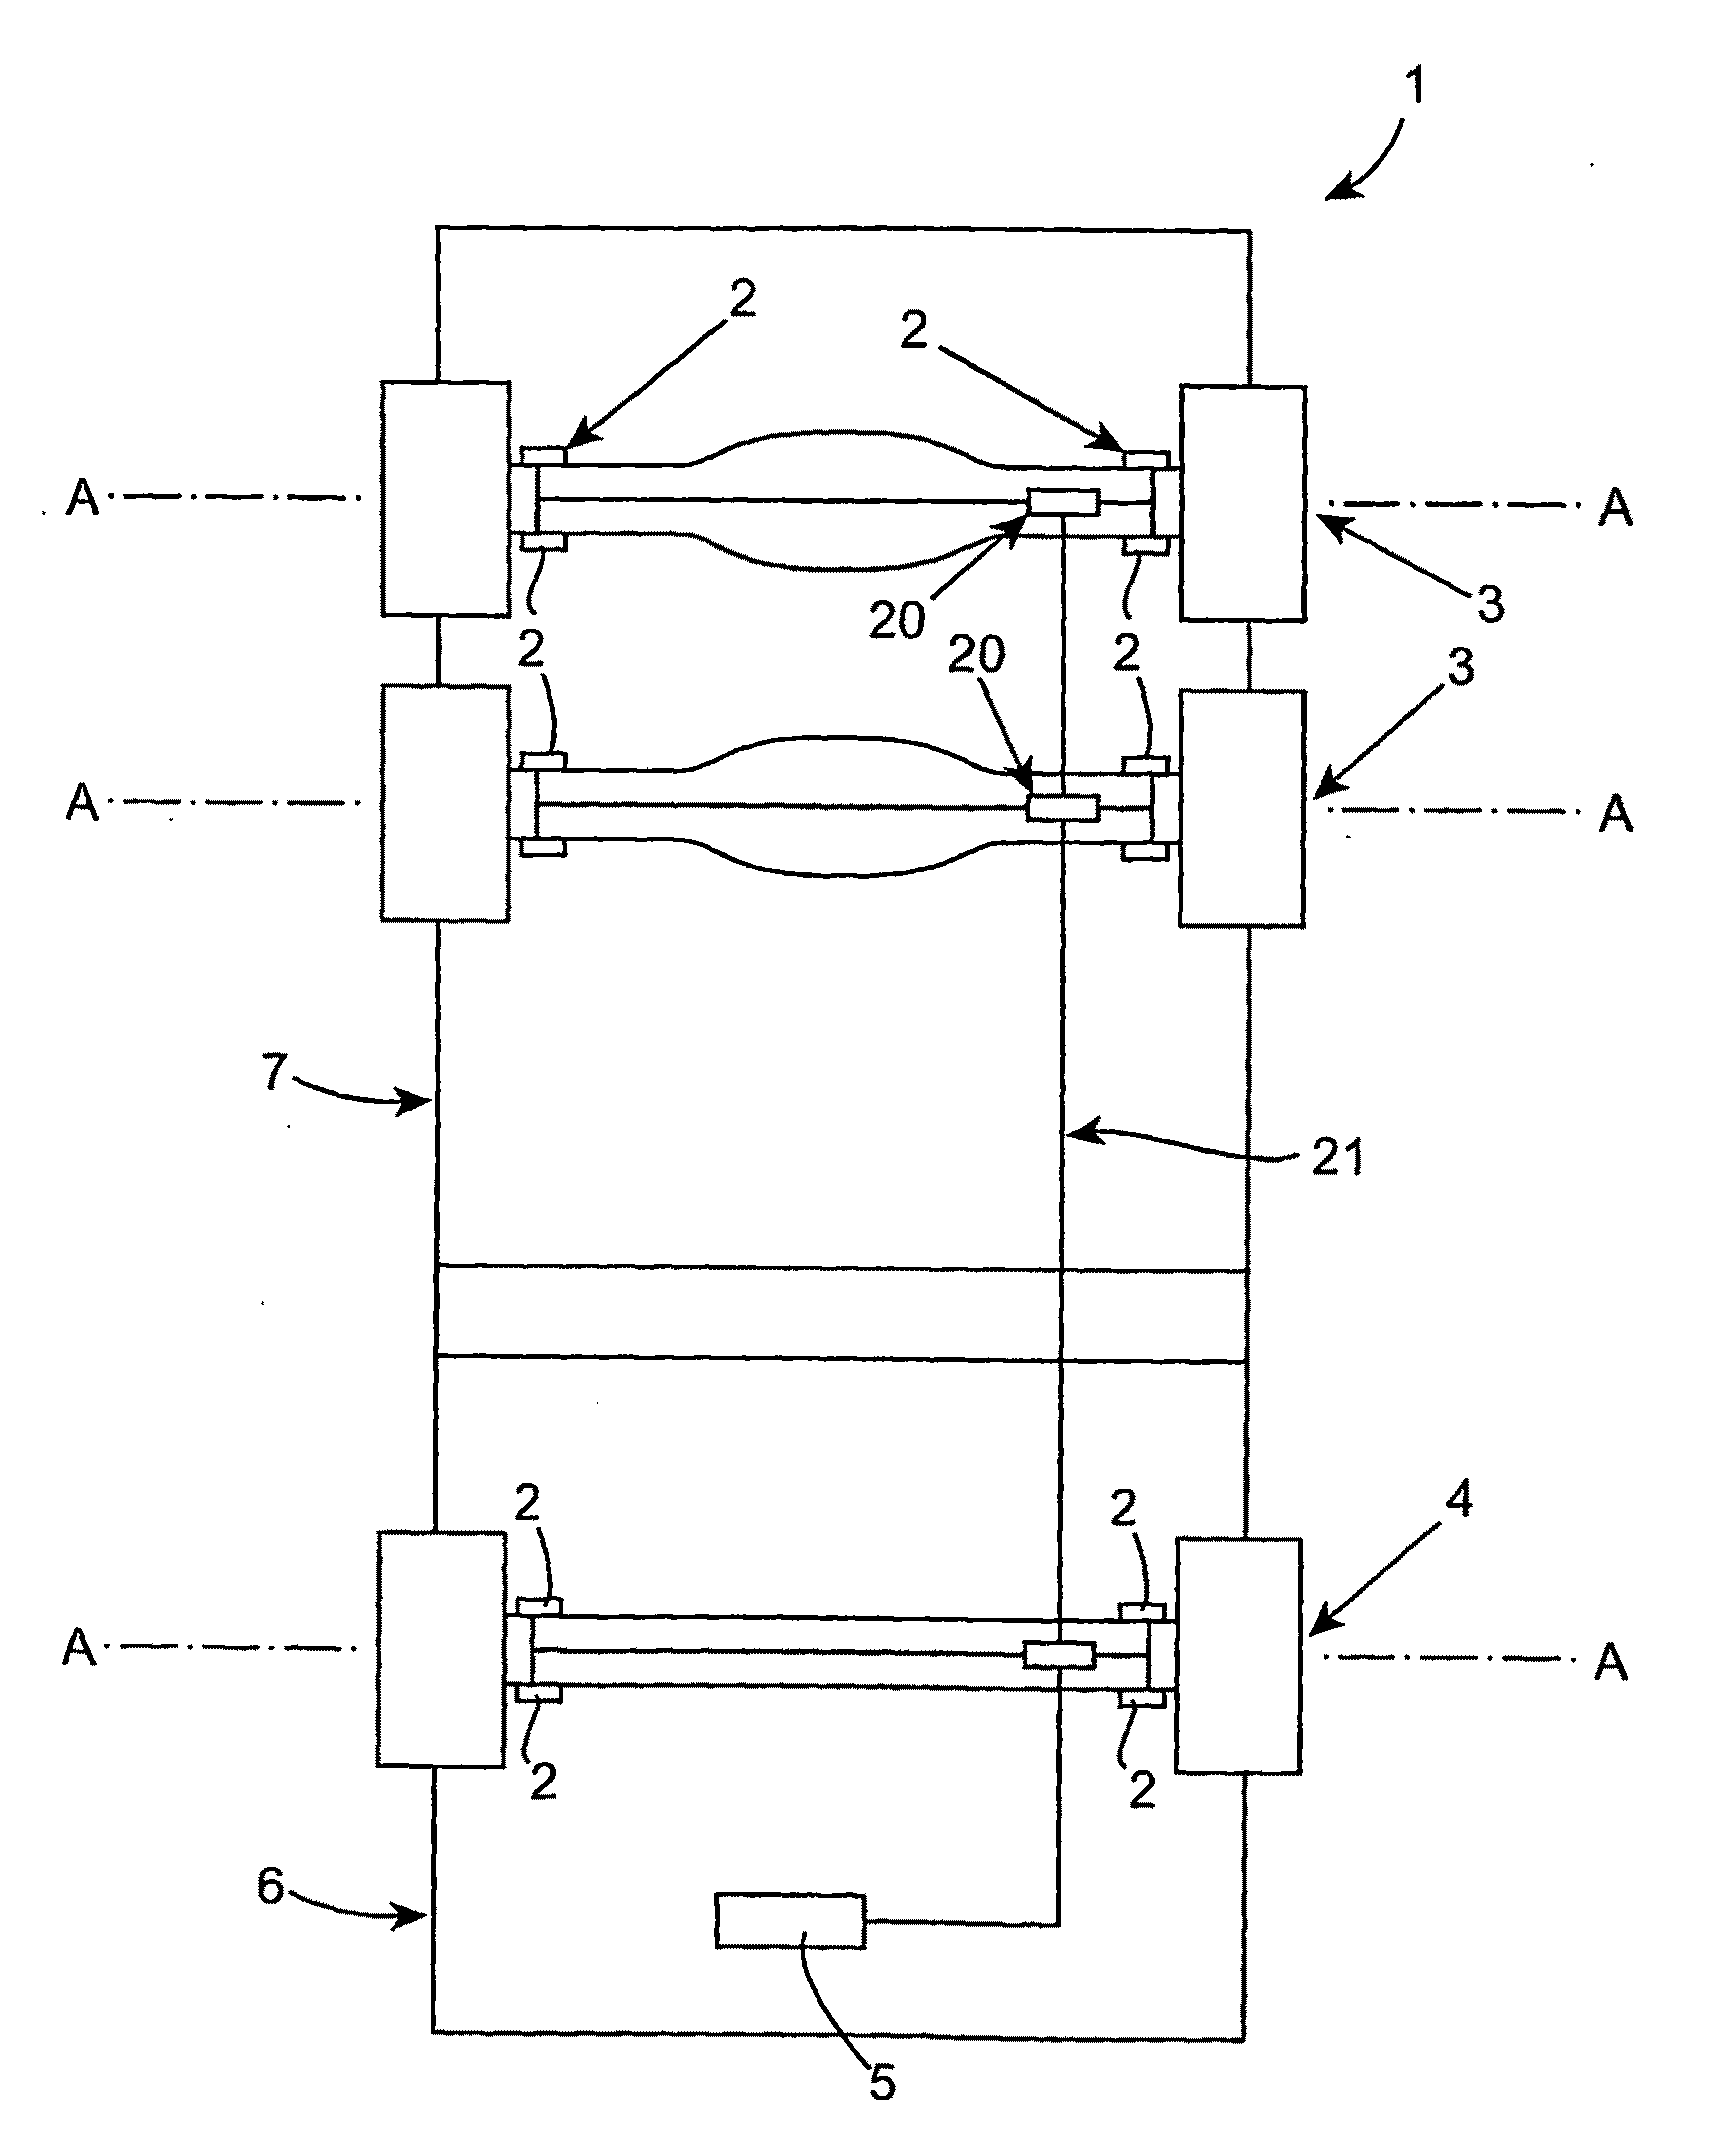 System for Determining a Vehicle Load